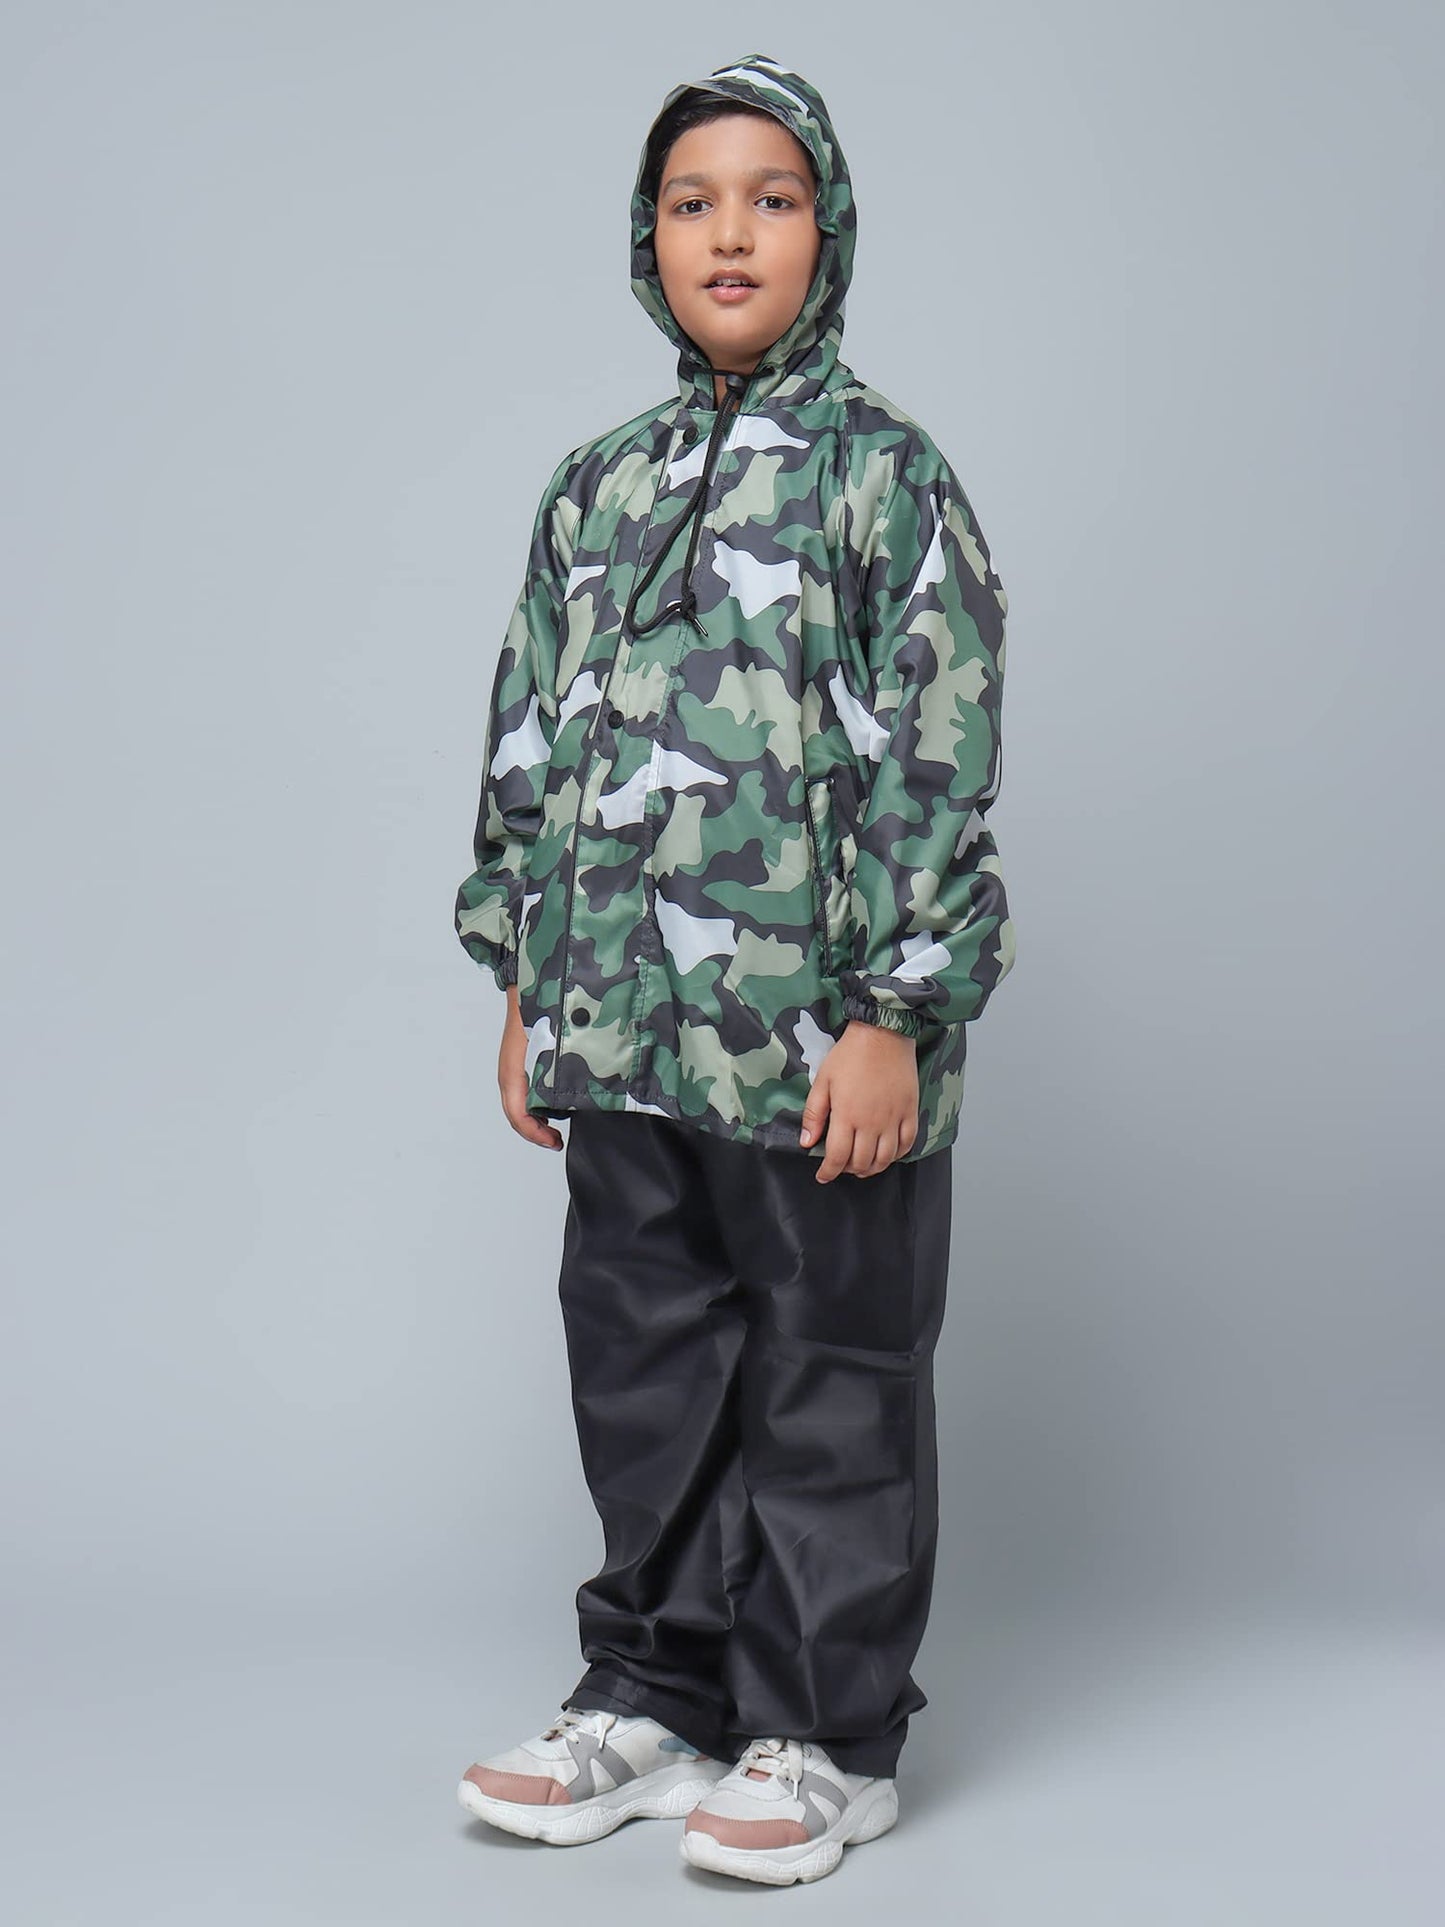 The Clownfish Comrad Series Kids Waterproof Nylon Double Coating Reversible Raincoat with Hood and Reflector Logo at Back. Set of Top and Bottom. Printed Plastic Pouch. Kid Age-14-16 years(Green Camo)